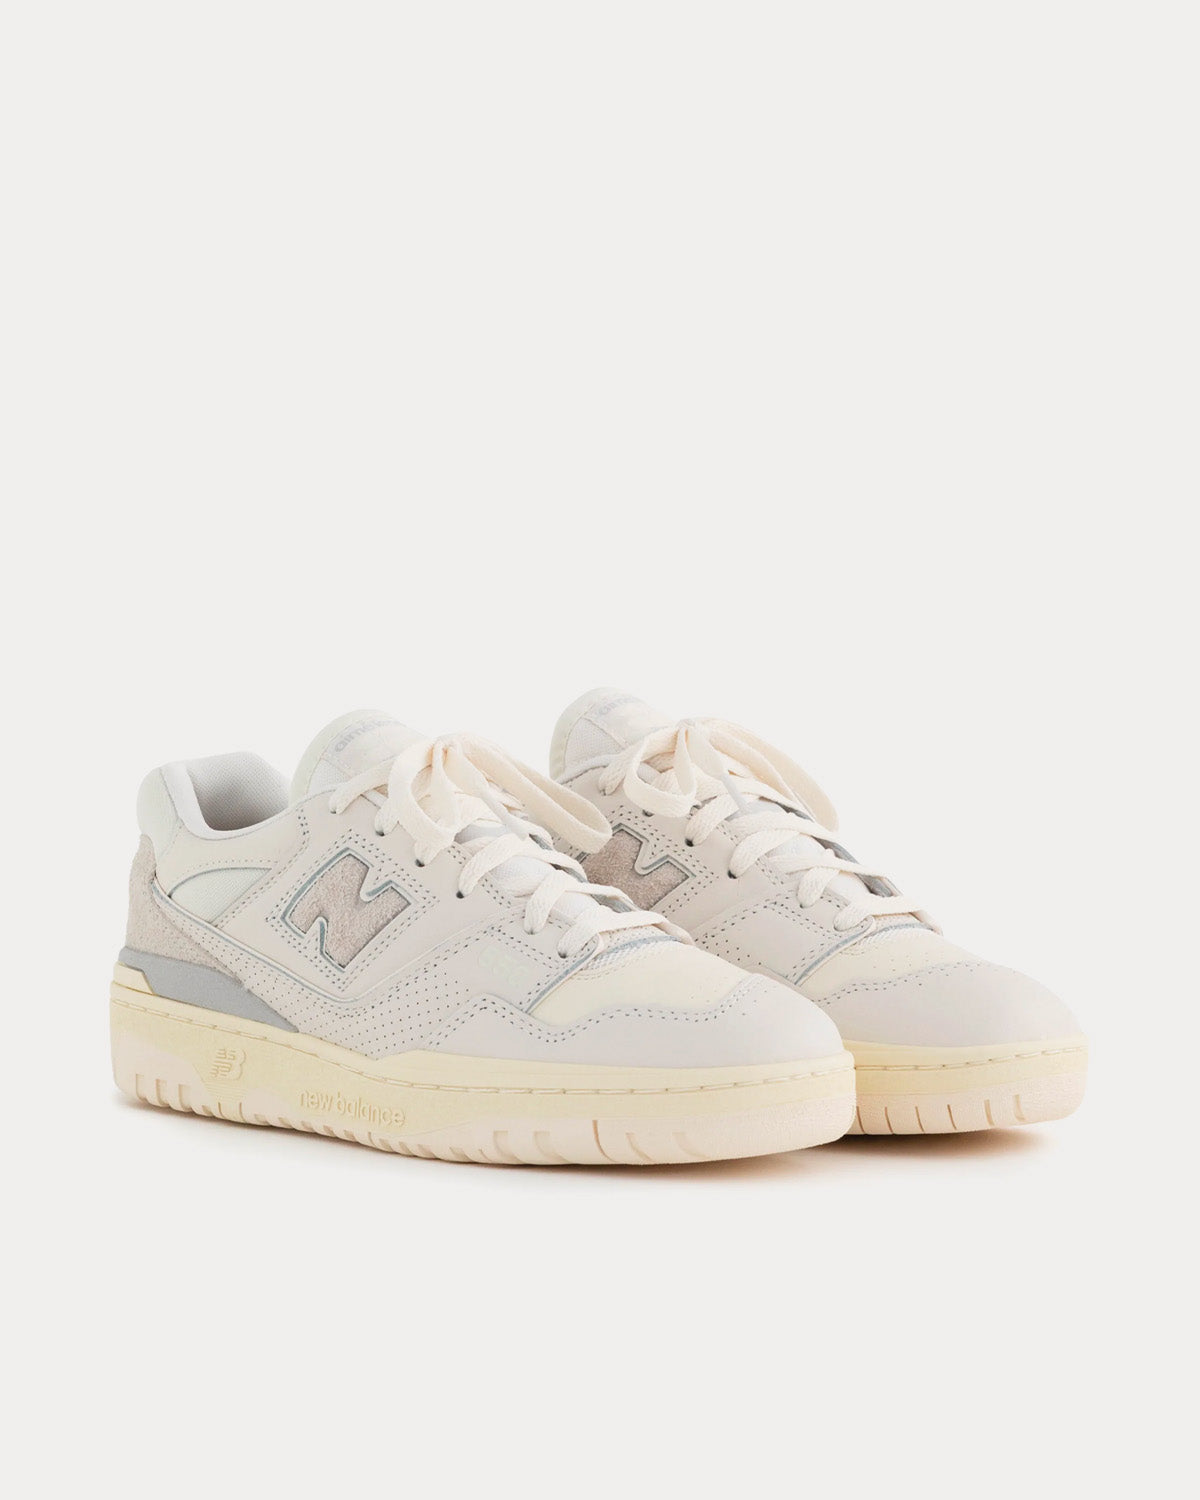 New Balance x Aime Leon Dore - P550 Basketball Oxfords White Low Top Sneakers